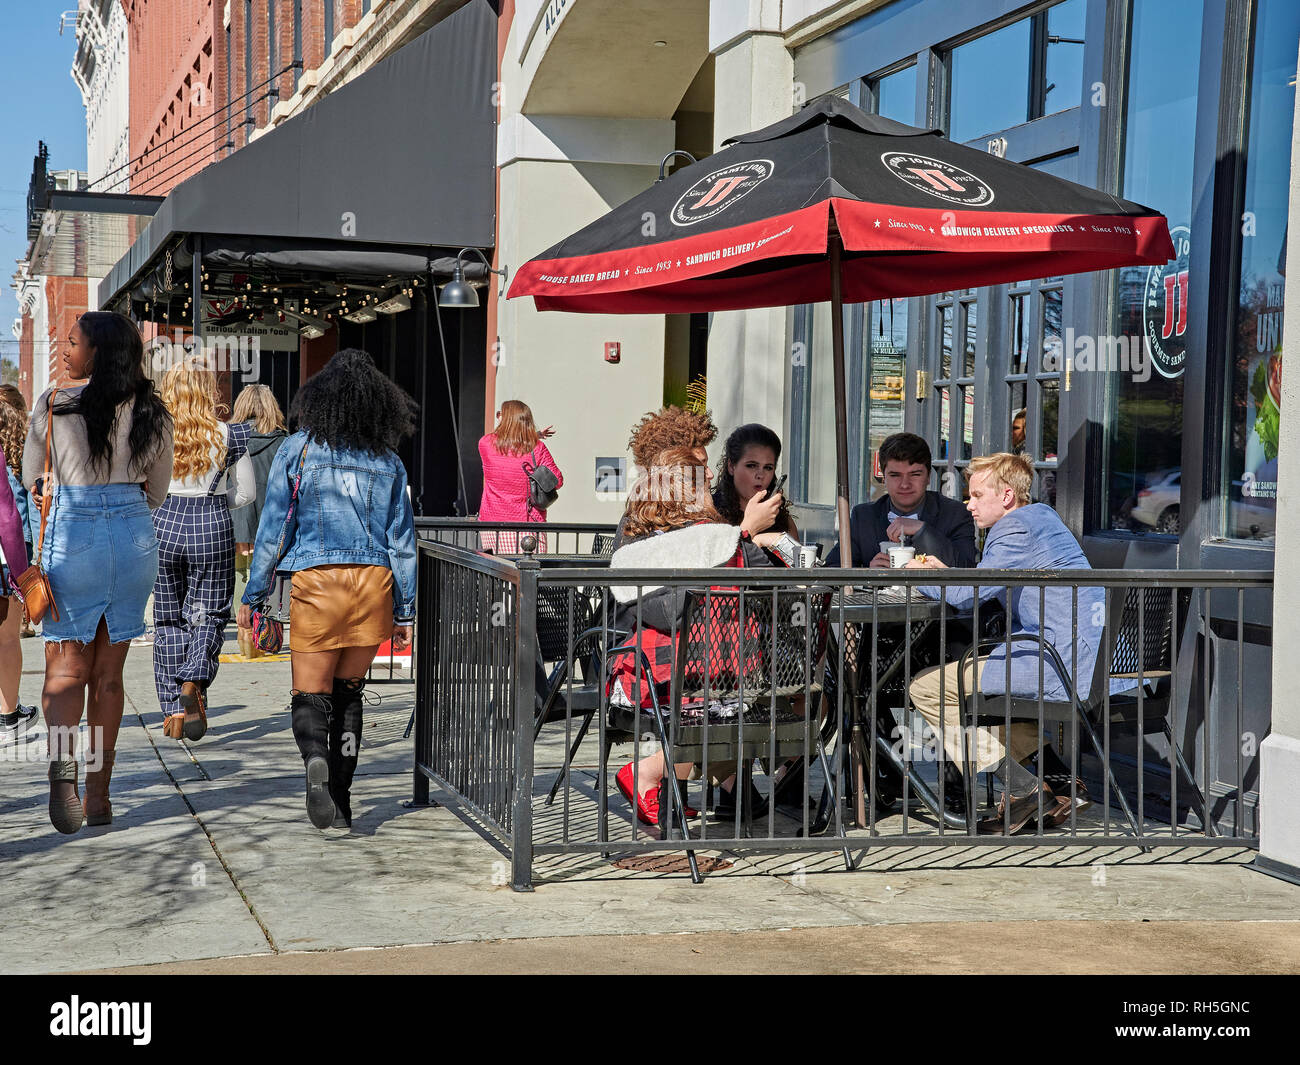 Group of teens or teenagers eating at a sidewalk cafe, Jimmy Johns restaurant or sandwich shop in Montgomery Alabama, USA. Stock Photo